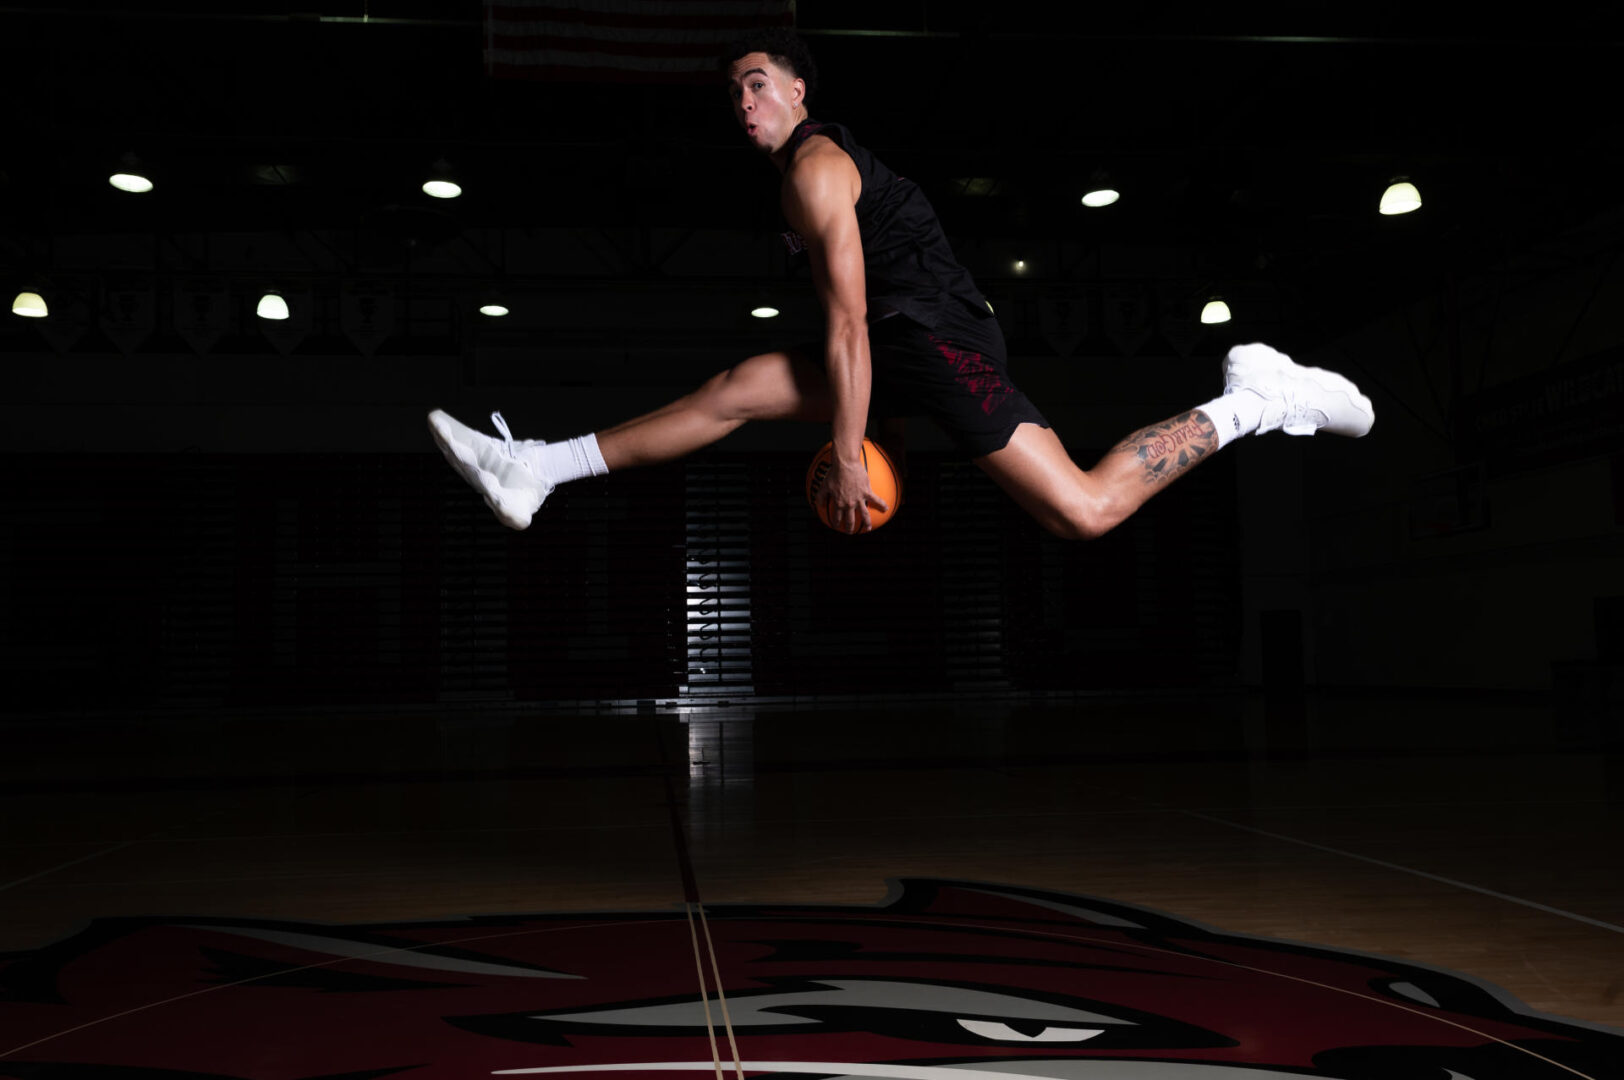 Men’s basketball player Evan Oliver stares at the camera mid-jump in the air with his legs in a near split and a basketball in between his legs.